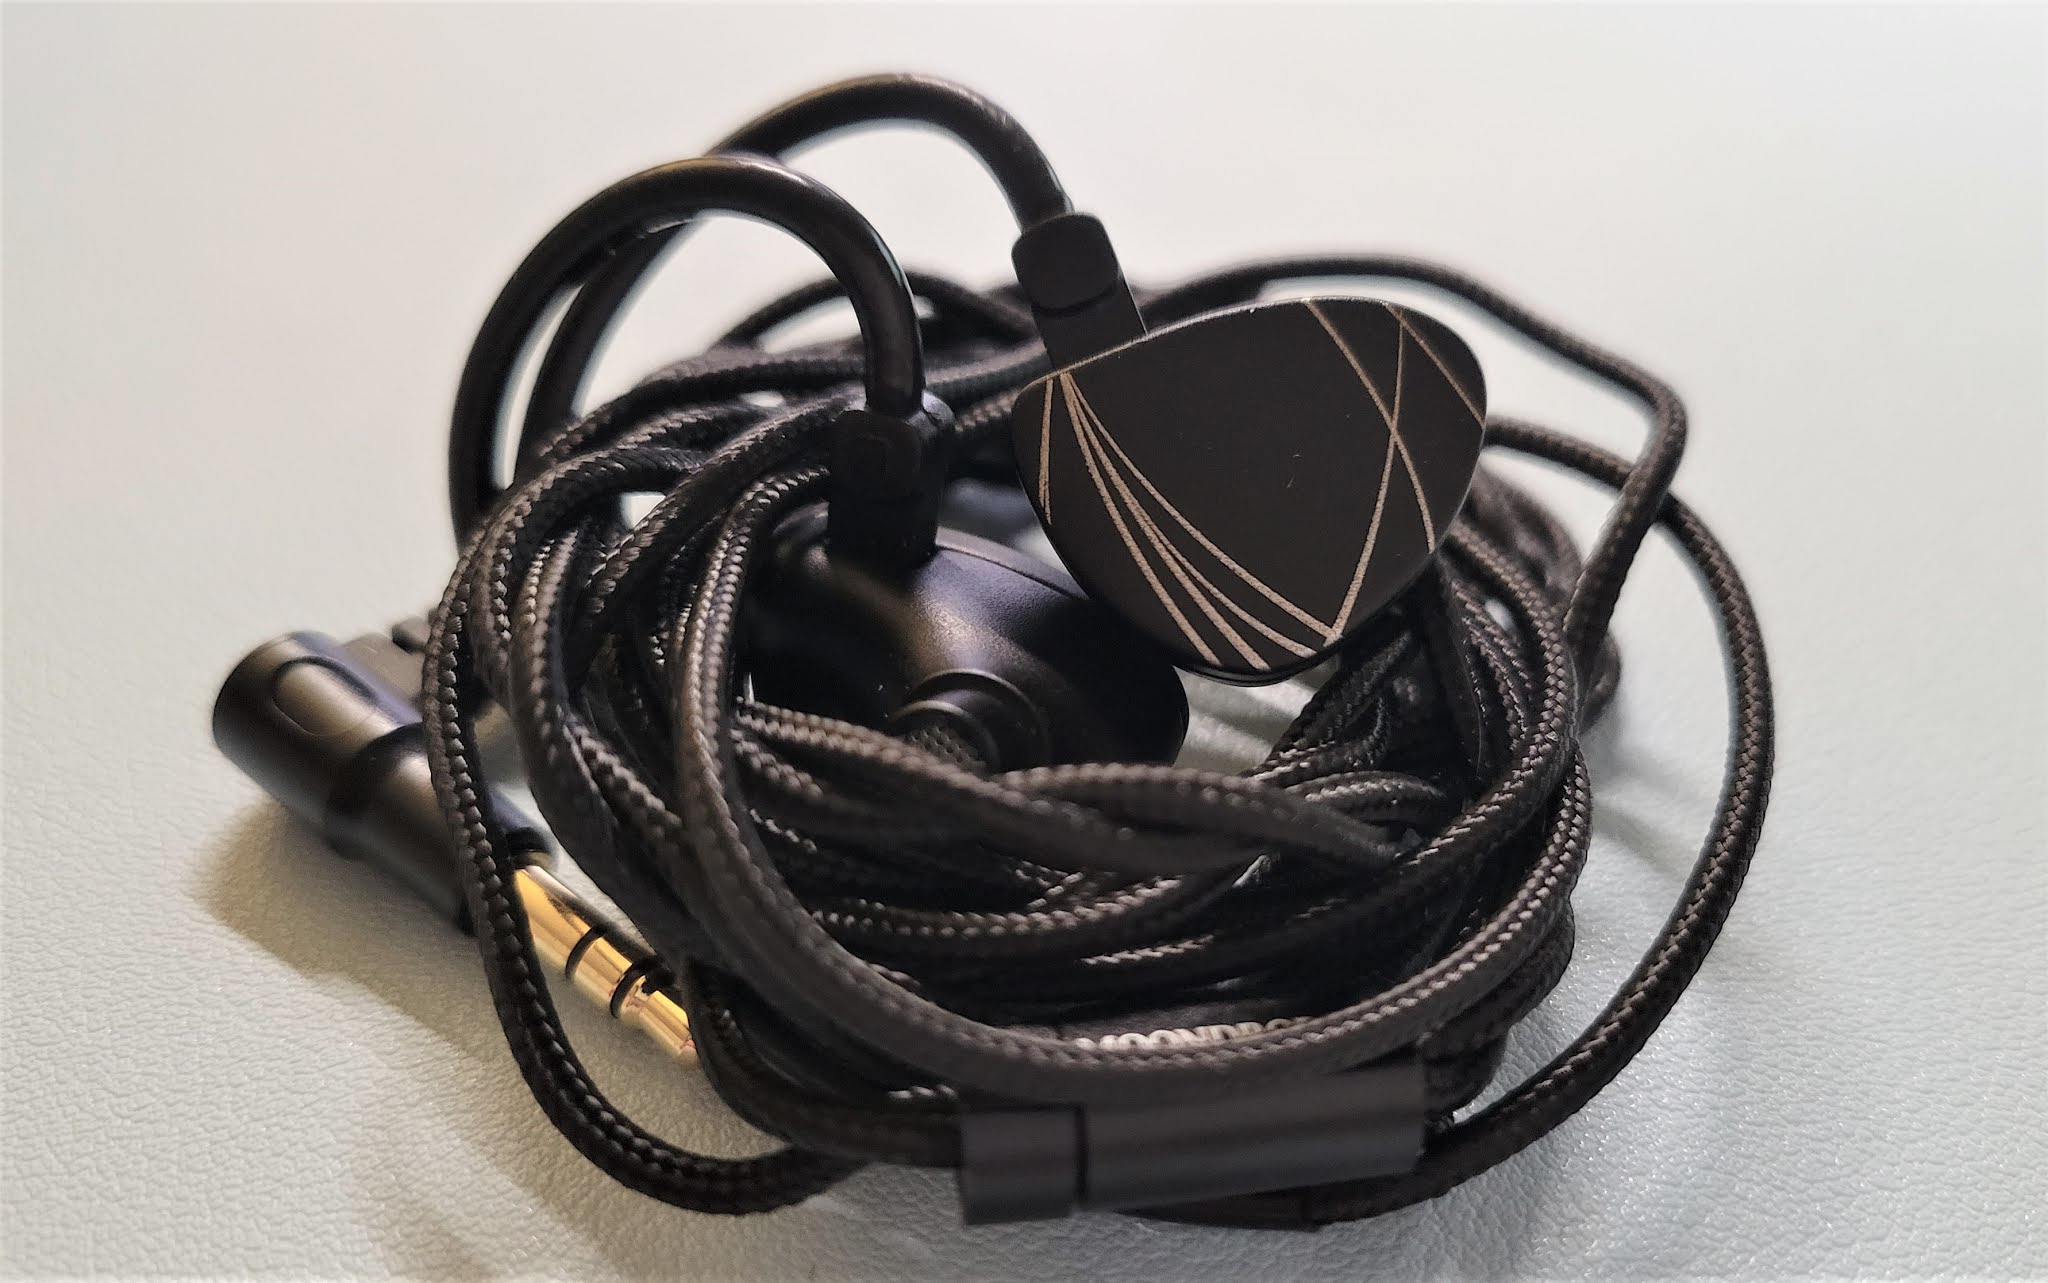 Moondrop Aria 2  Headphone Reviews and Discussion 